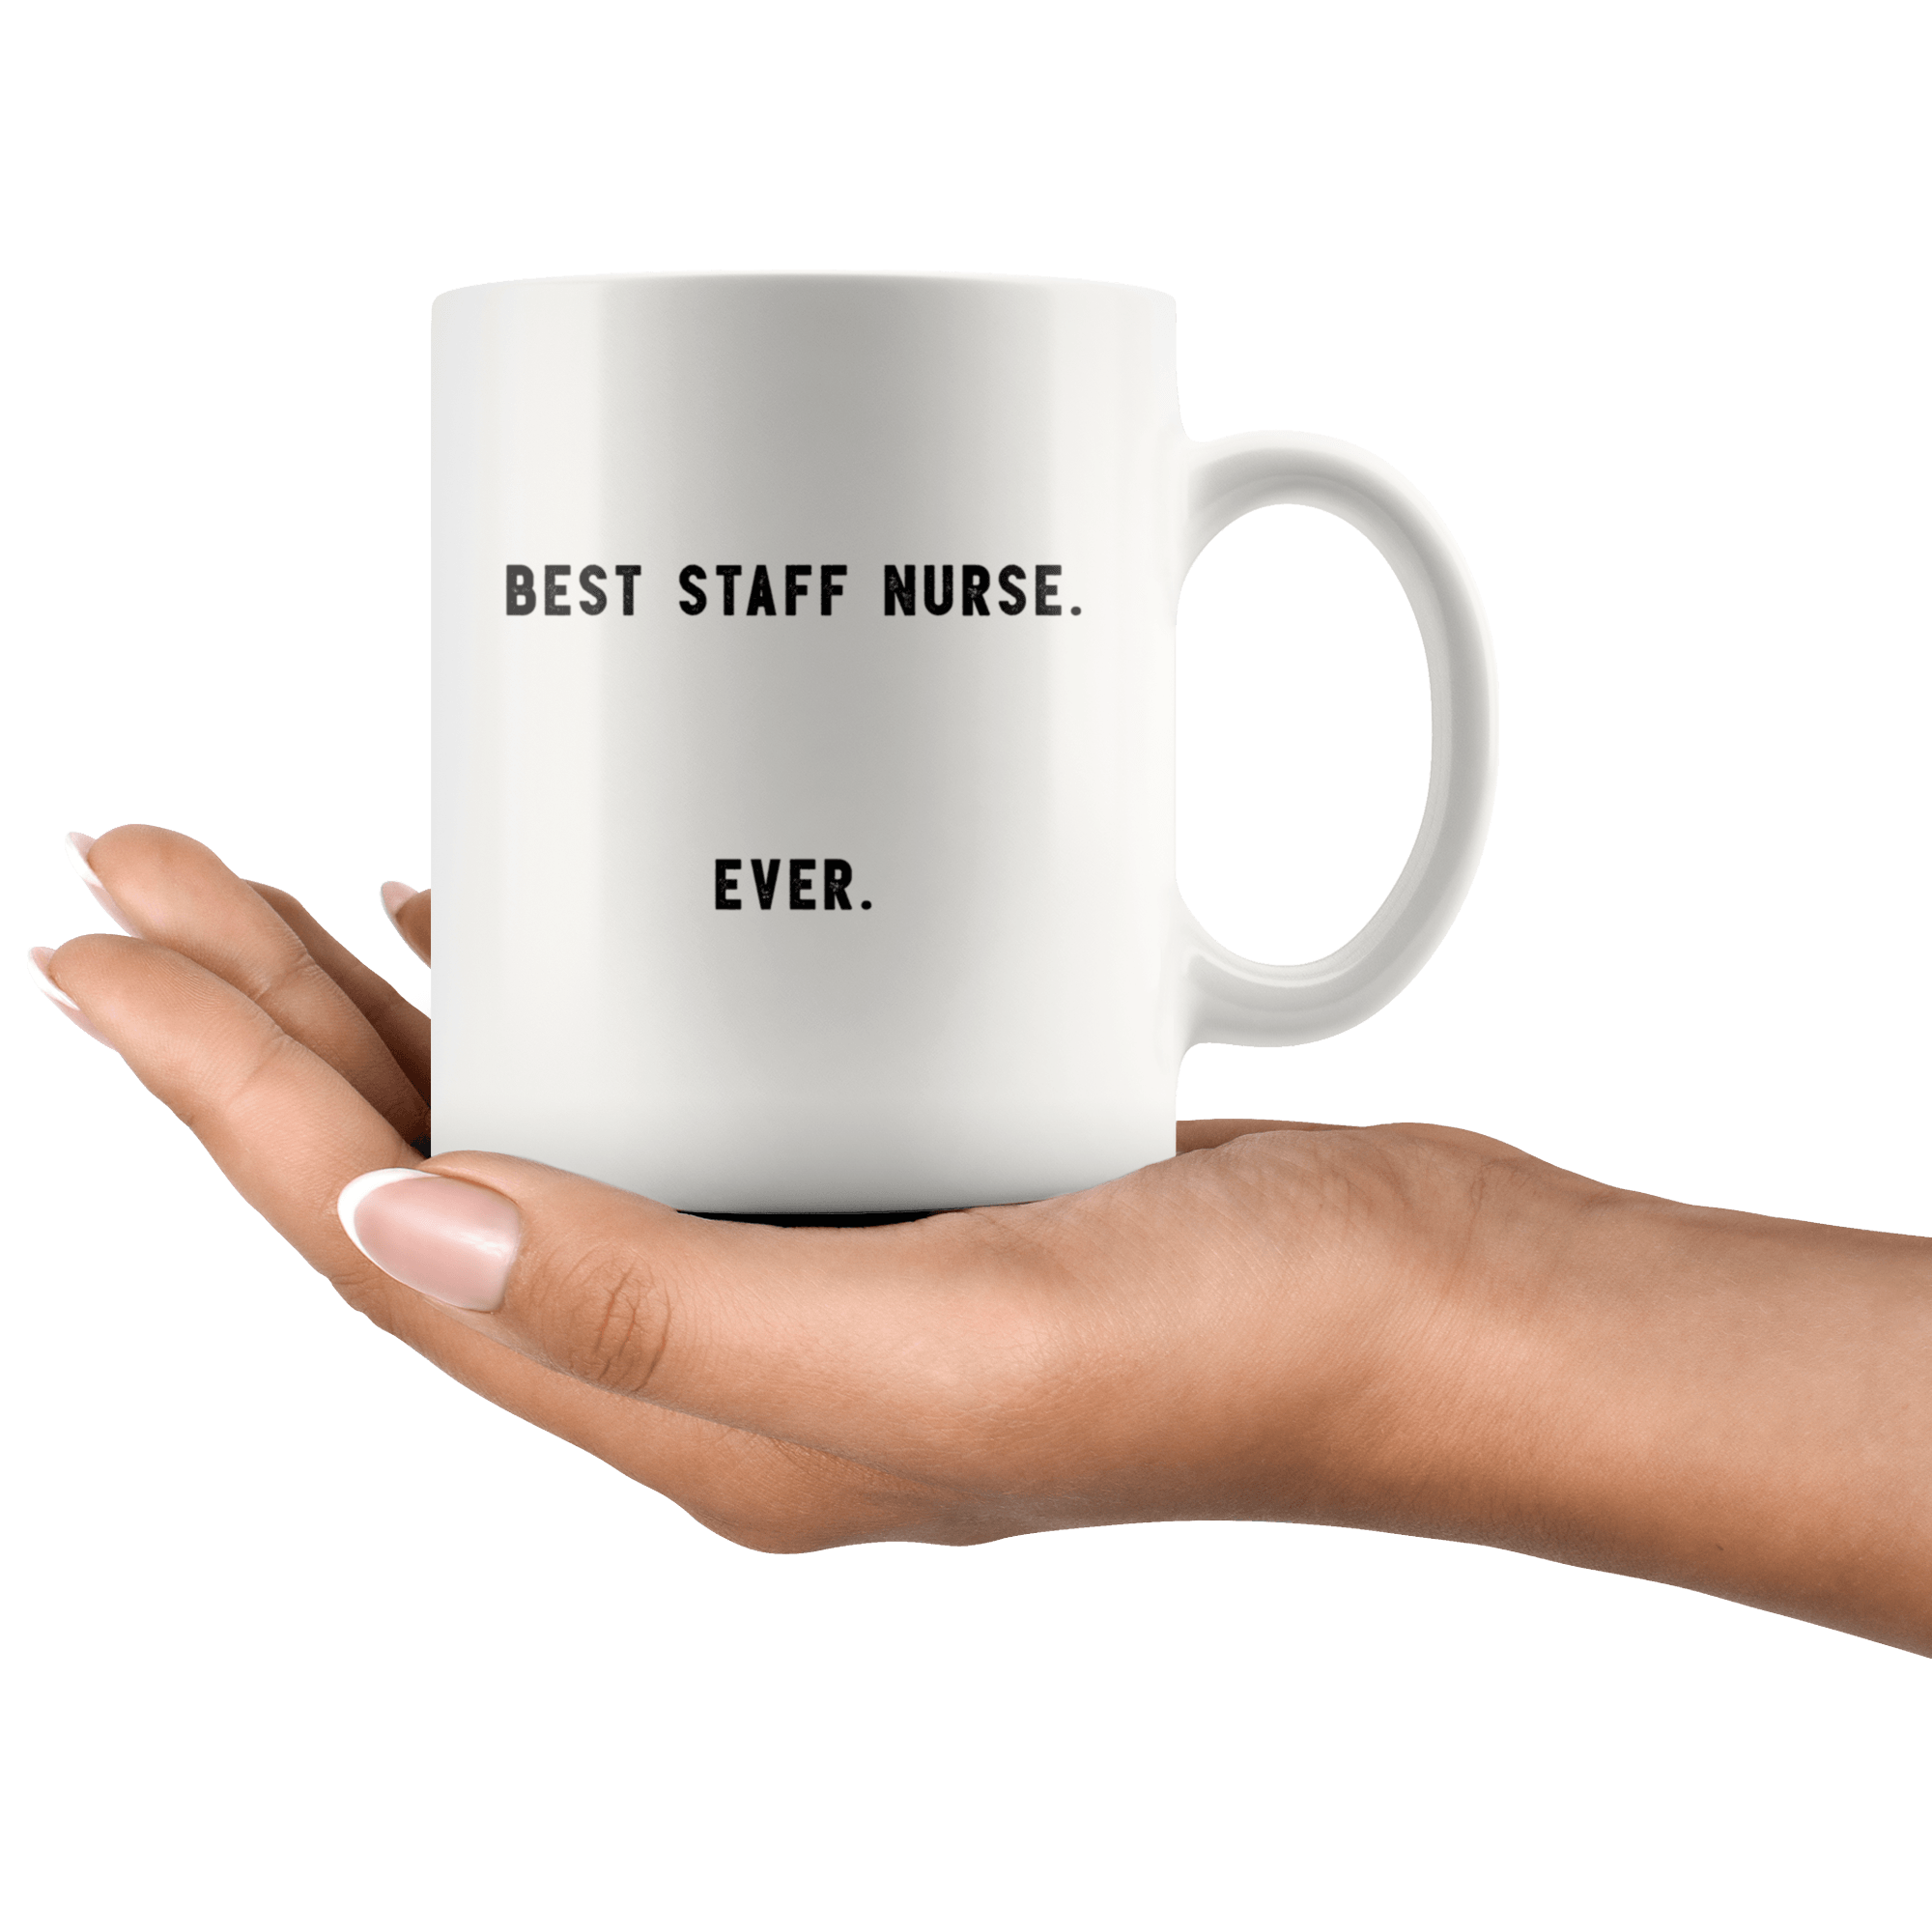 Buy Best Employee Ever-Employee Appreciation Gifts,Gifts for Employee,Employee  Gift,Employee Birthday,Employee Christmas,Staff Gift,Employee Coffee  Mug,Office Gift,Employee Present,Gifts for Staff Online at Low Prices in  India - Amazon.in